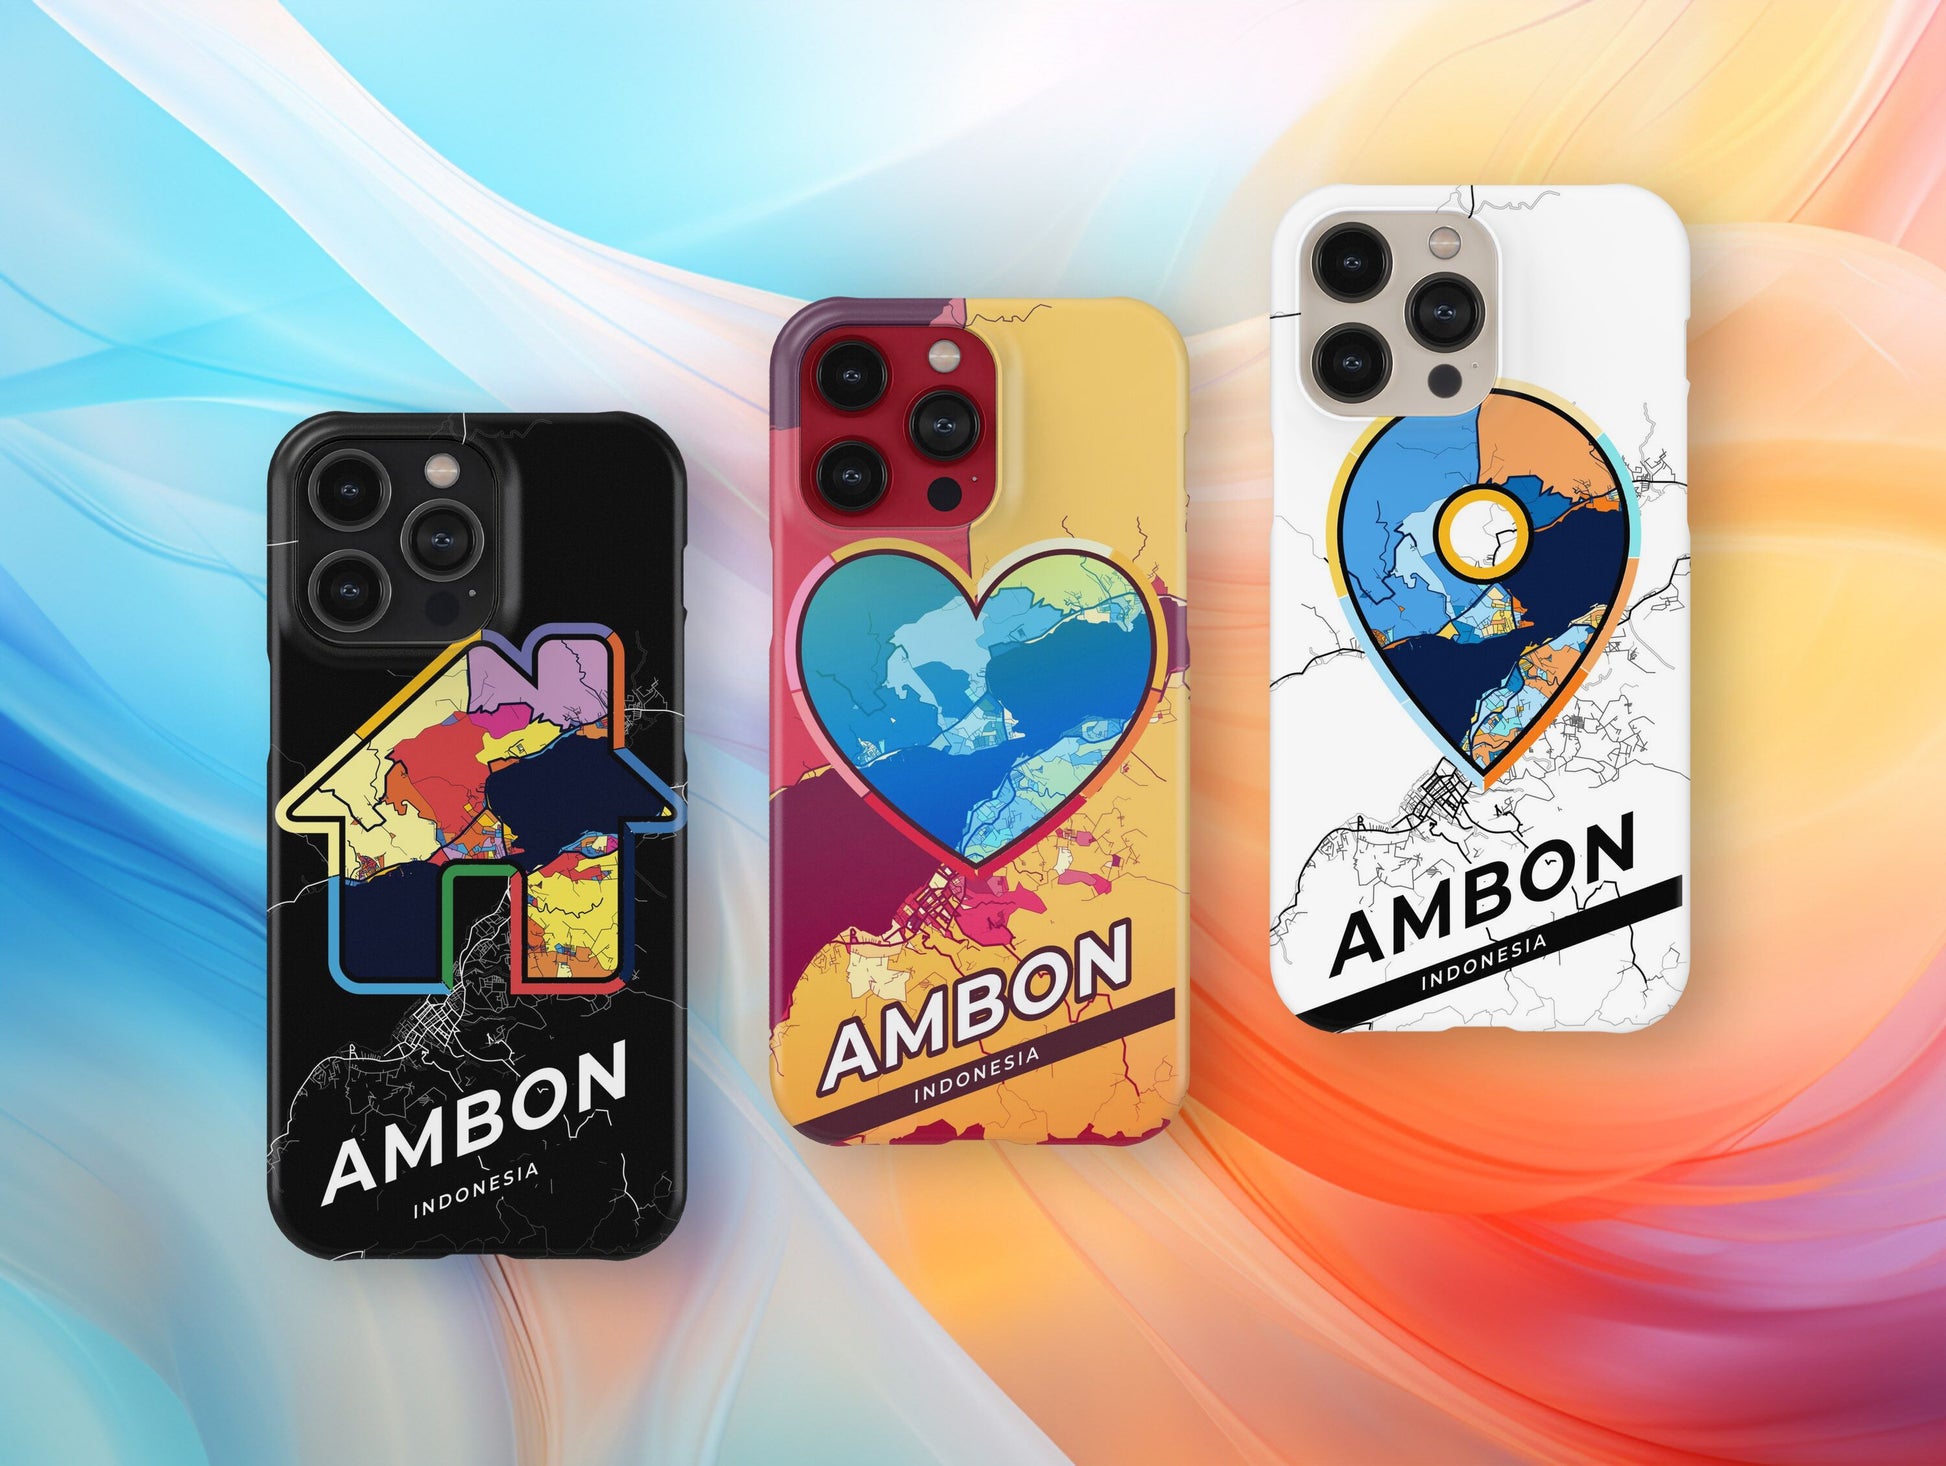 Ambon Indonesia slim phone case with colorful icon. Birthday, wedding or housewarming gift. Couple match cases.